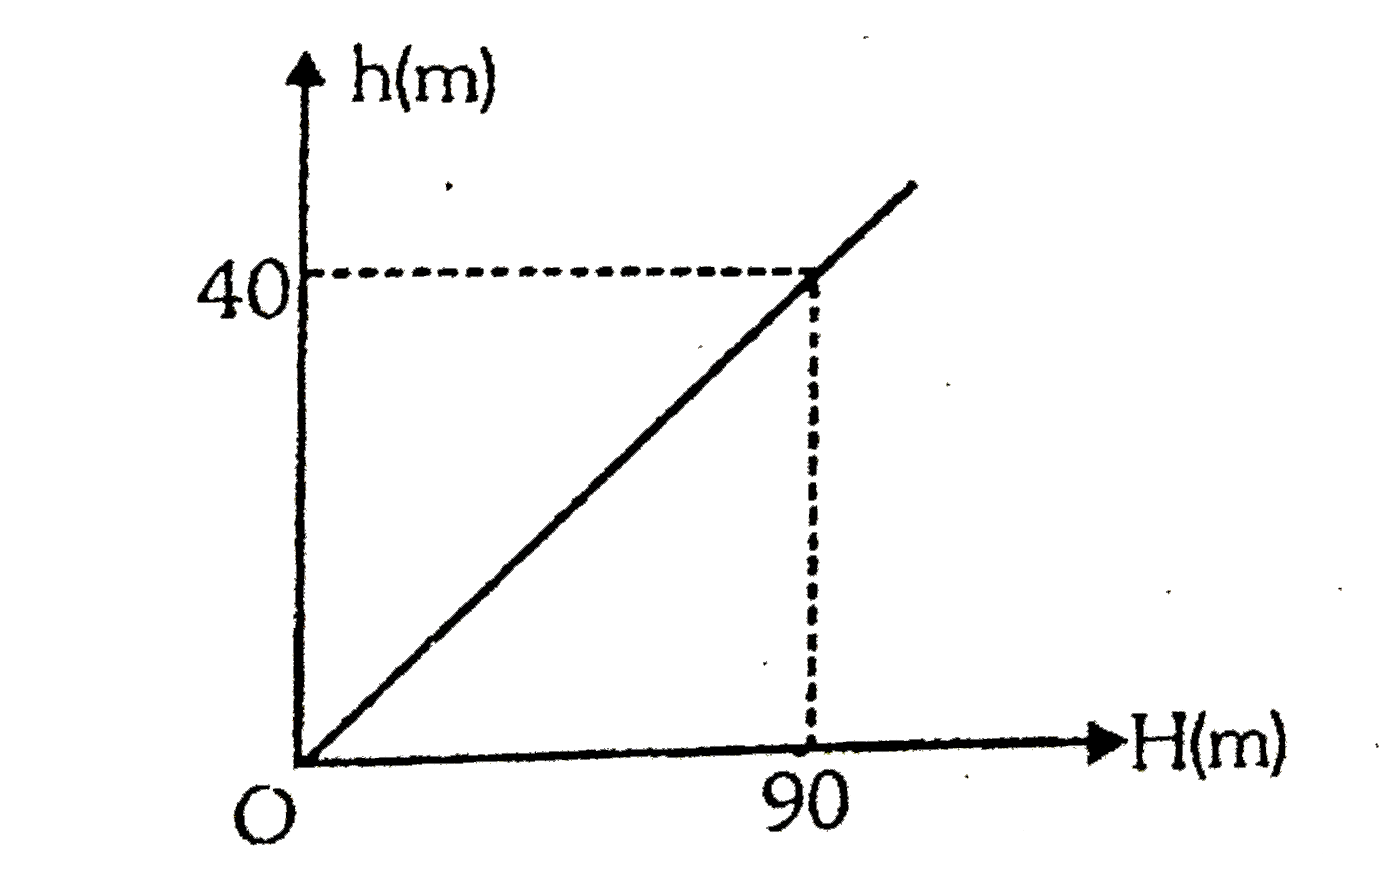 A ball of mass 2kg dropped from a height H above a horizontal surface rebounds to a height h after one bounce. The graph that relates H to h is shown in figure. If the ball was dropped from an initial height of 81 m and made ten bounces, the kinetic energy of the ball immediately after the second impact with the surface was